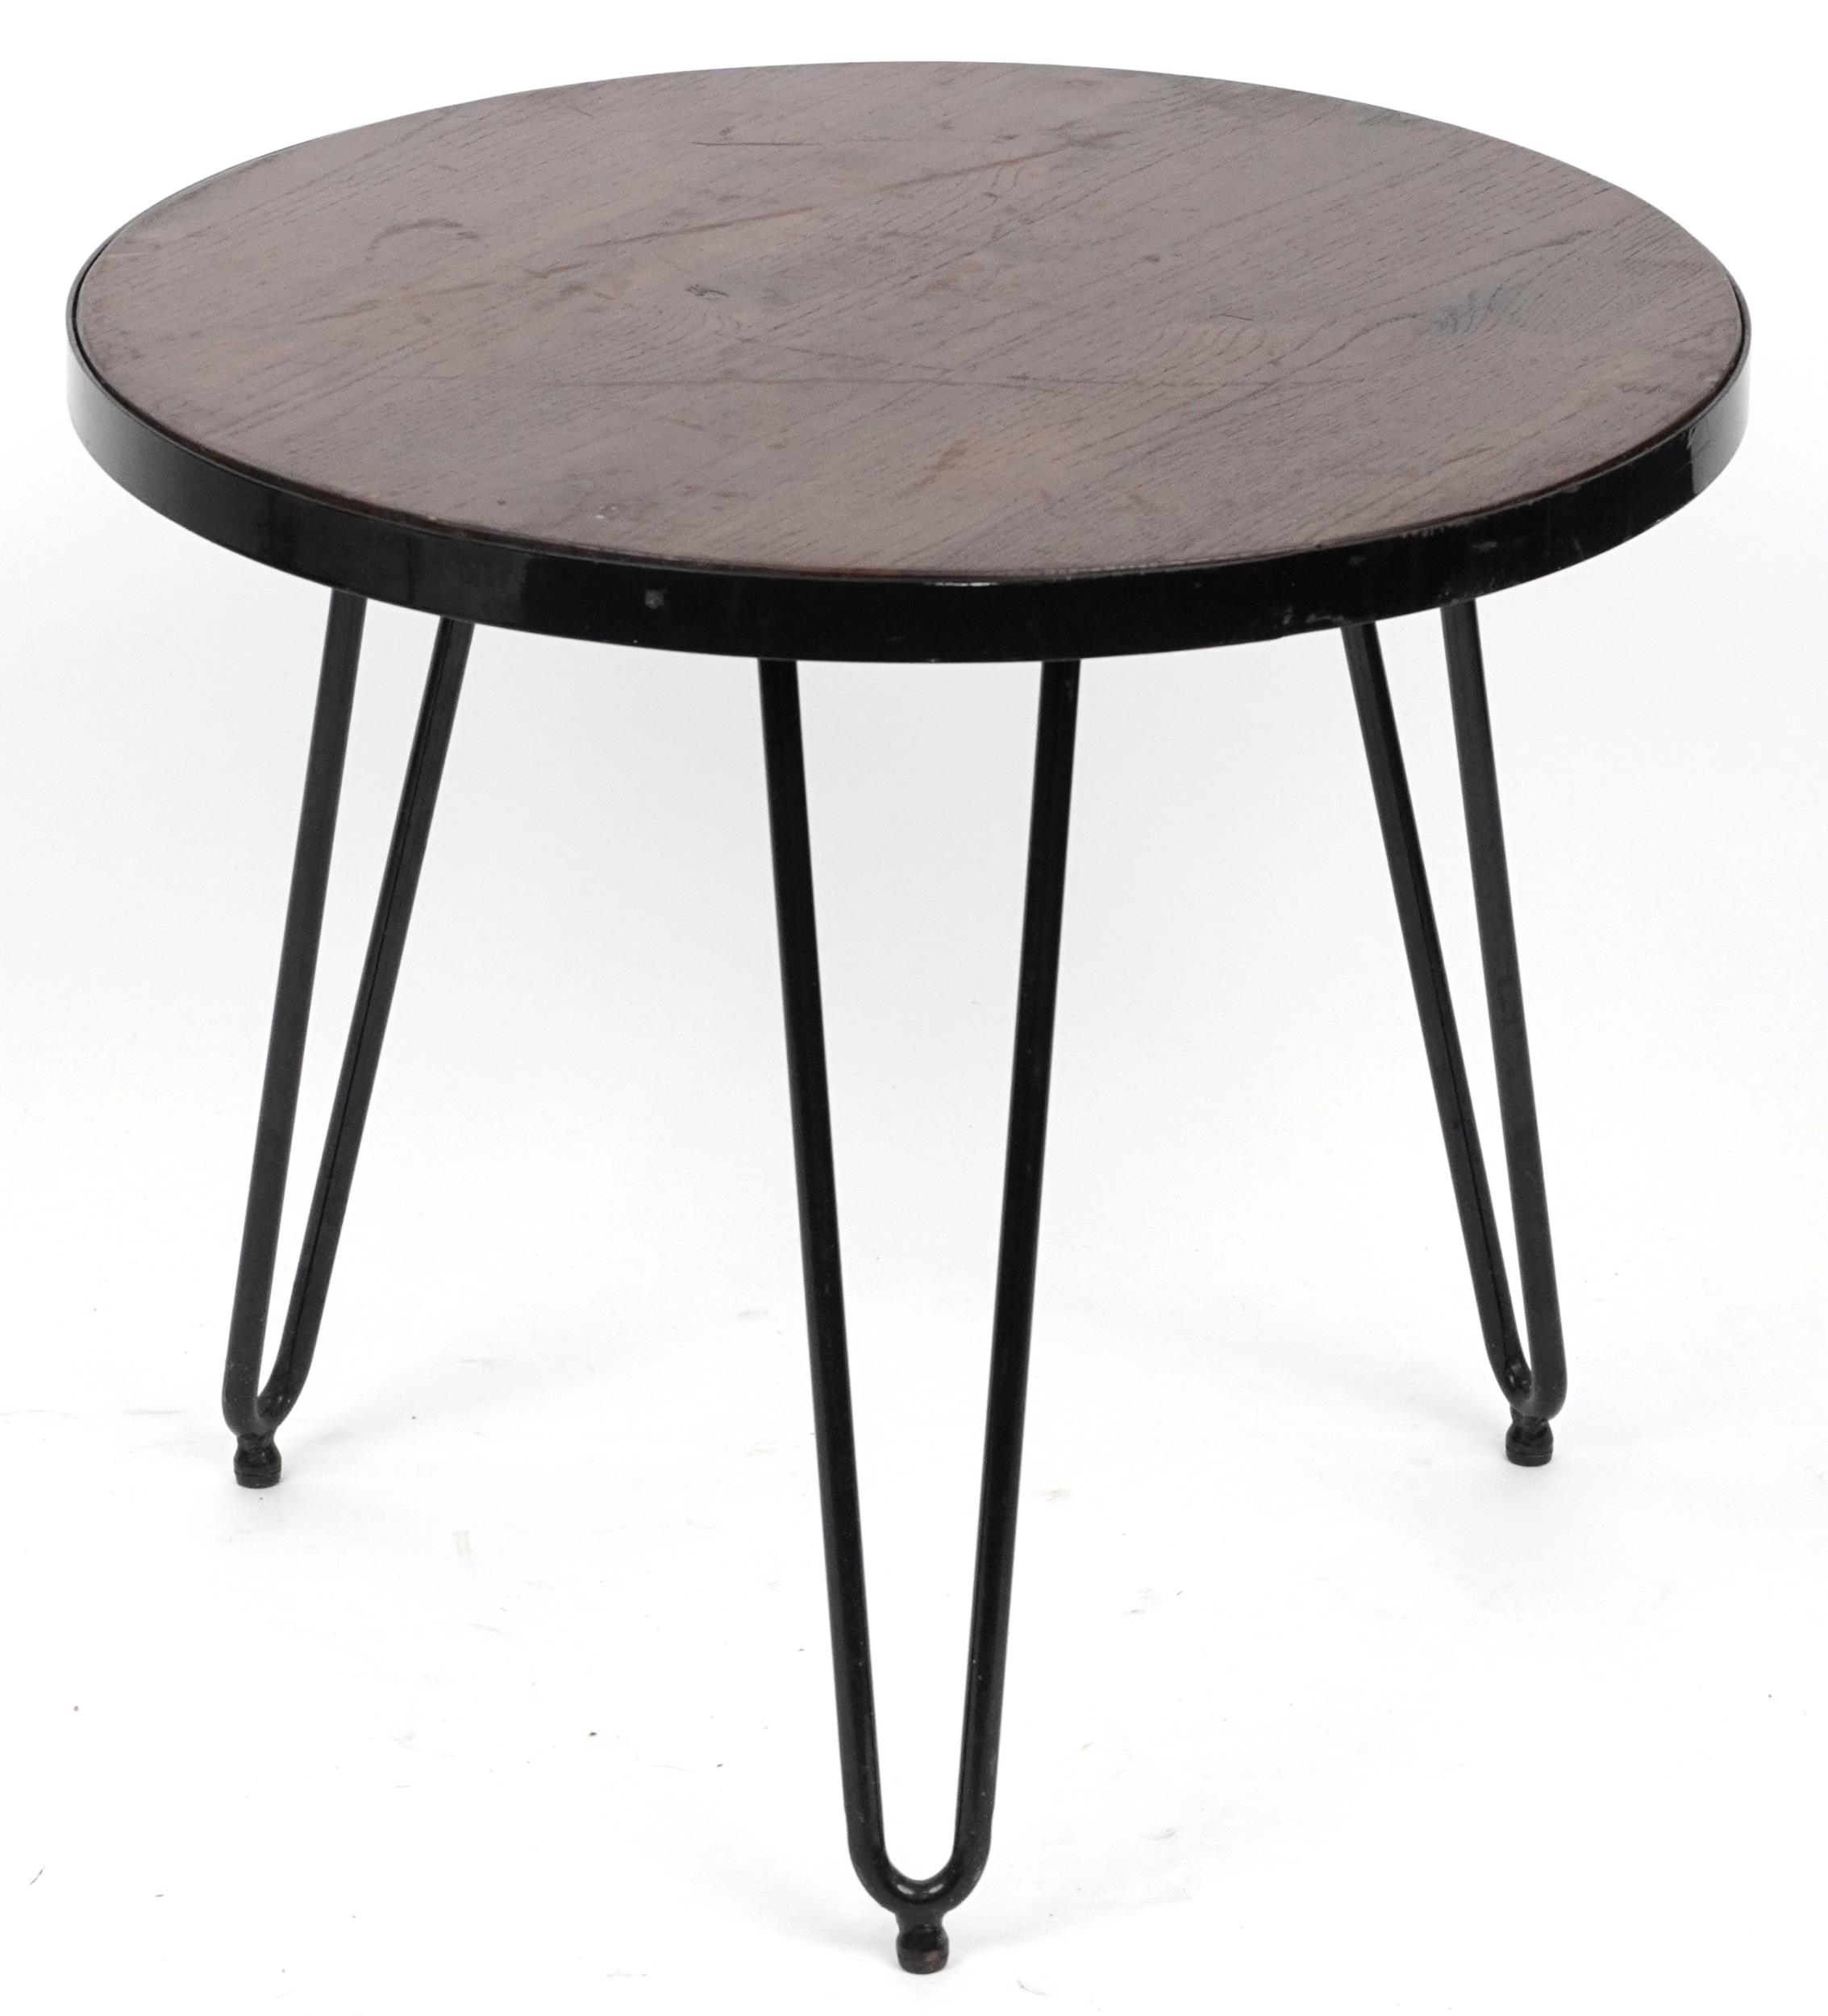 Industrial circular hardwood and wrought iron occasional table with hairpin legs, 53.5cm high x 61cm